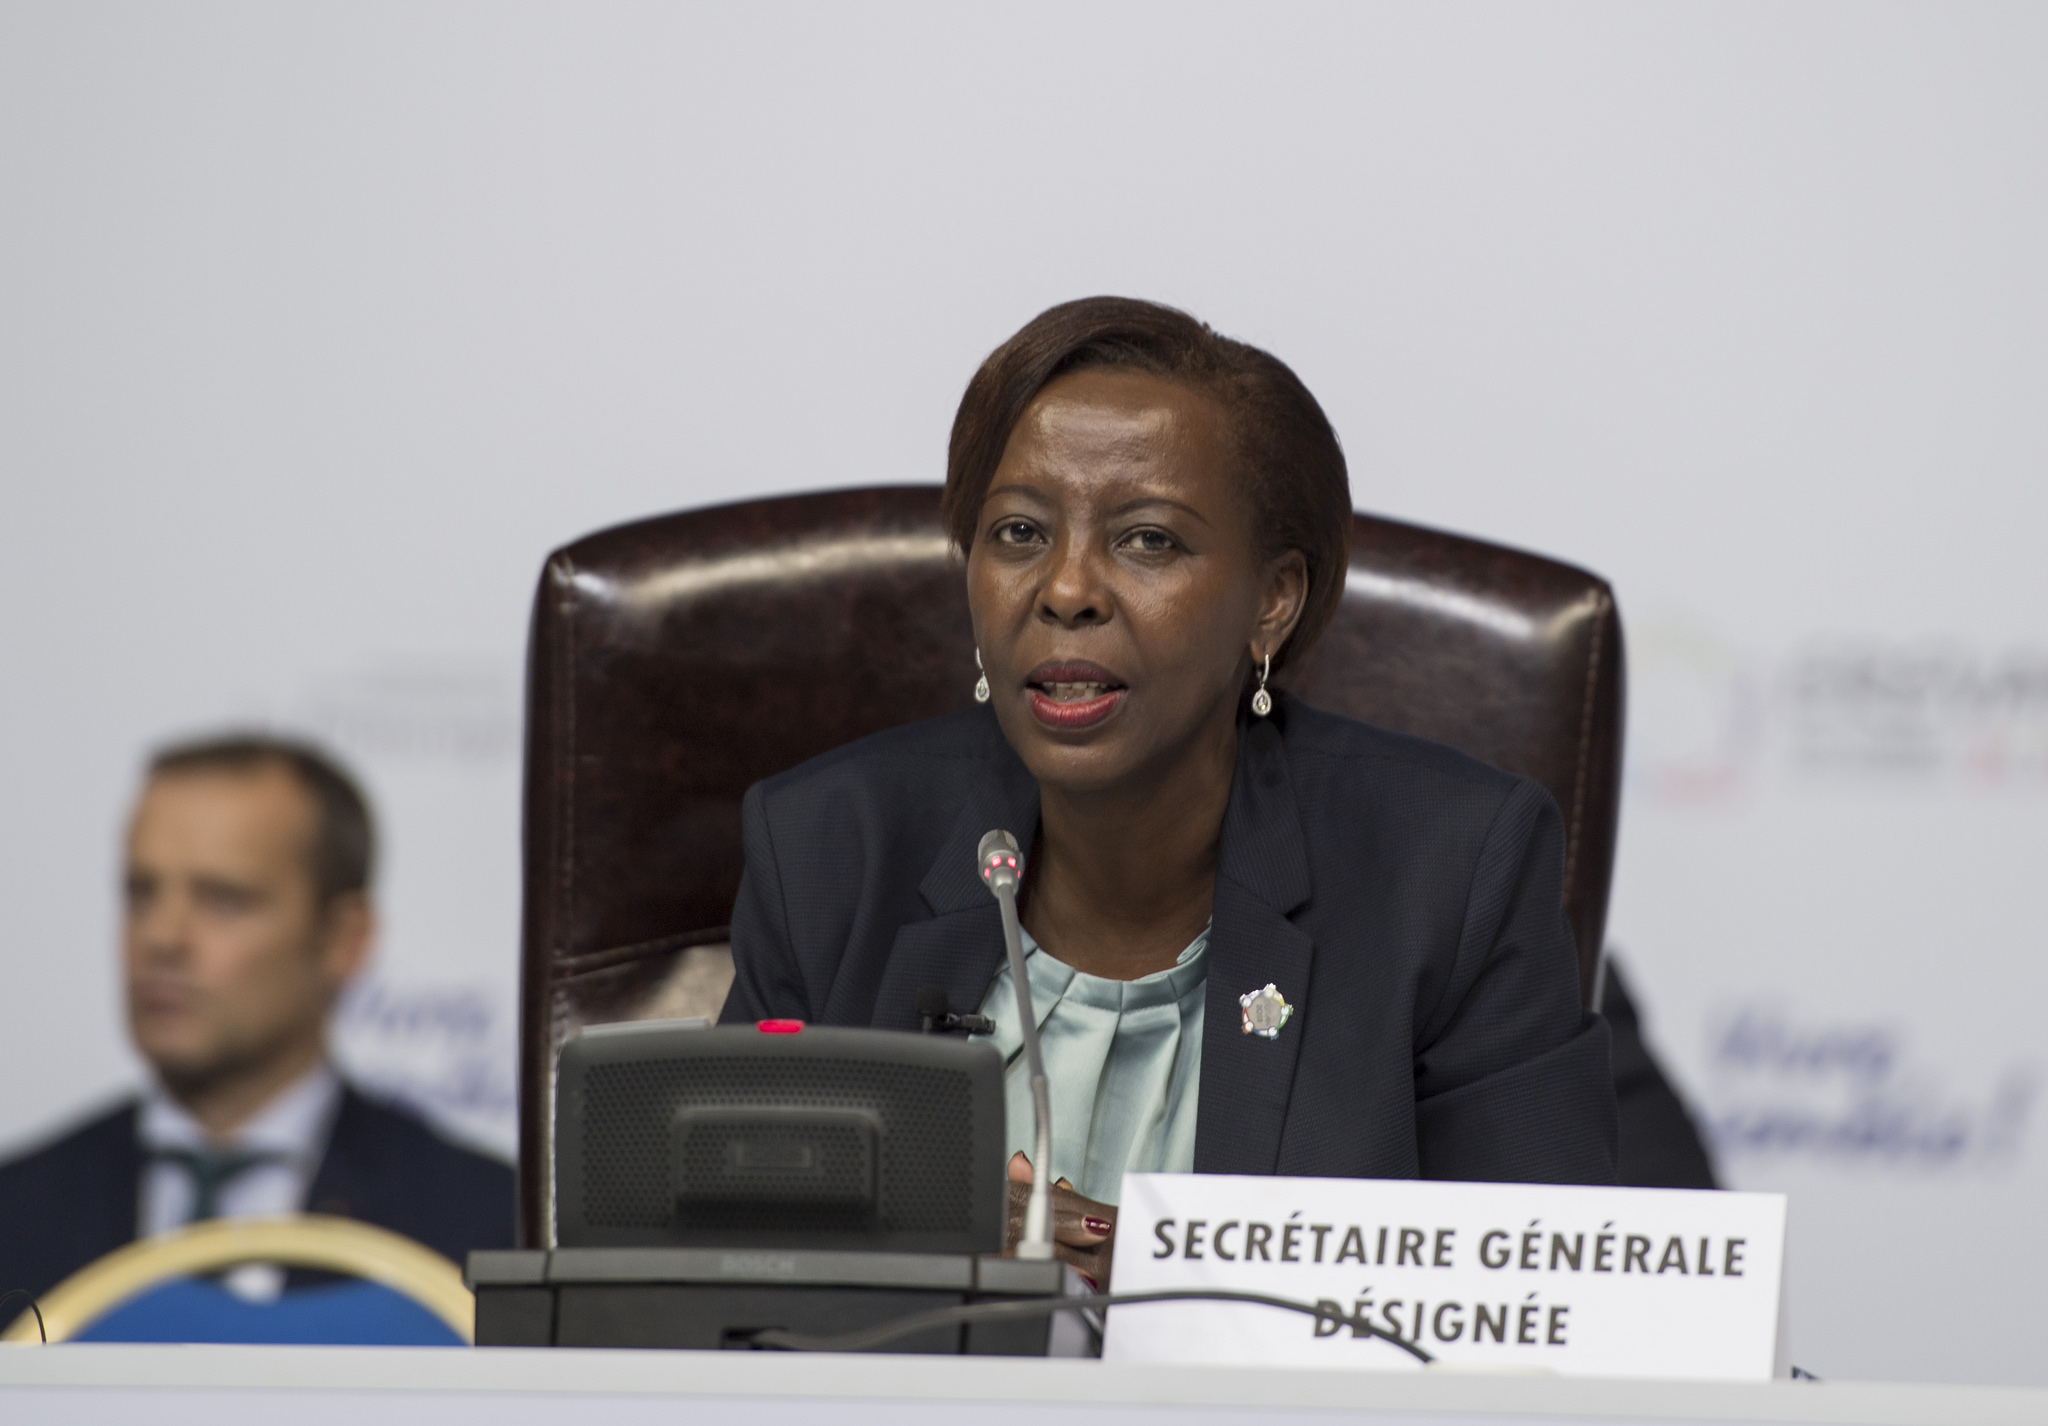 Mushikiwabo addressing a news conference after she was elected Secretary General in Armenia on Friday.